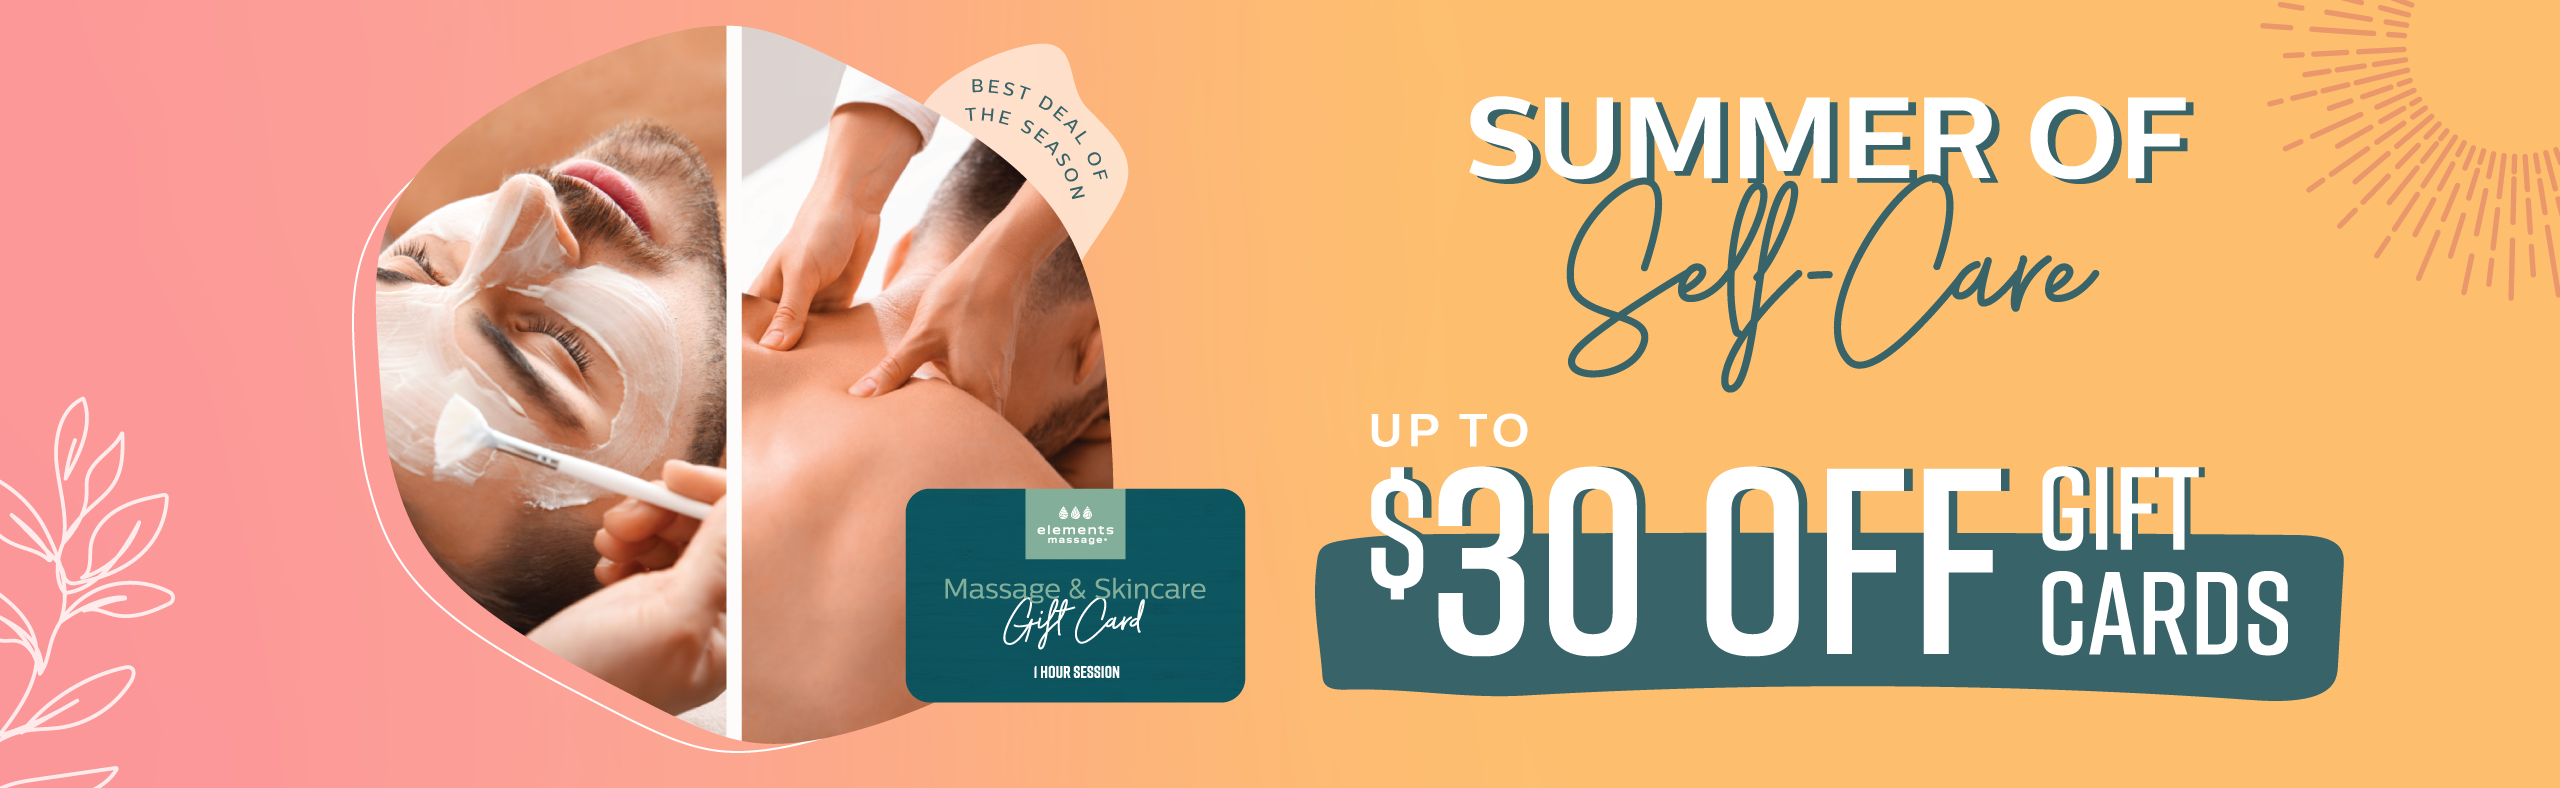 Summer of self-care: save up to $30 on gift cards